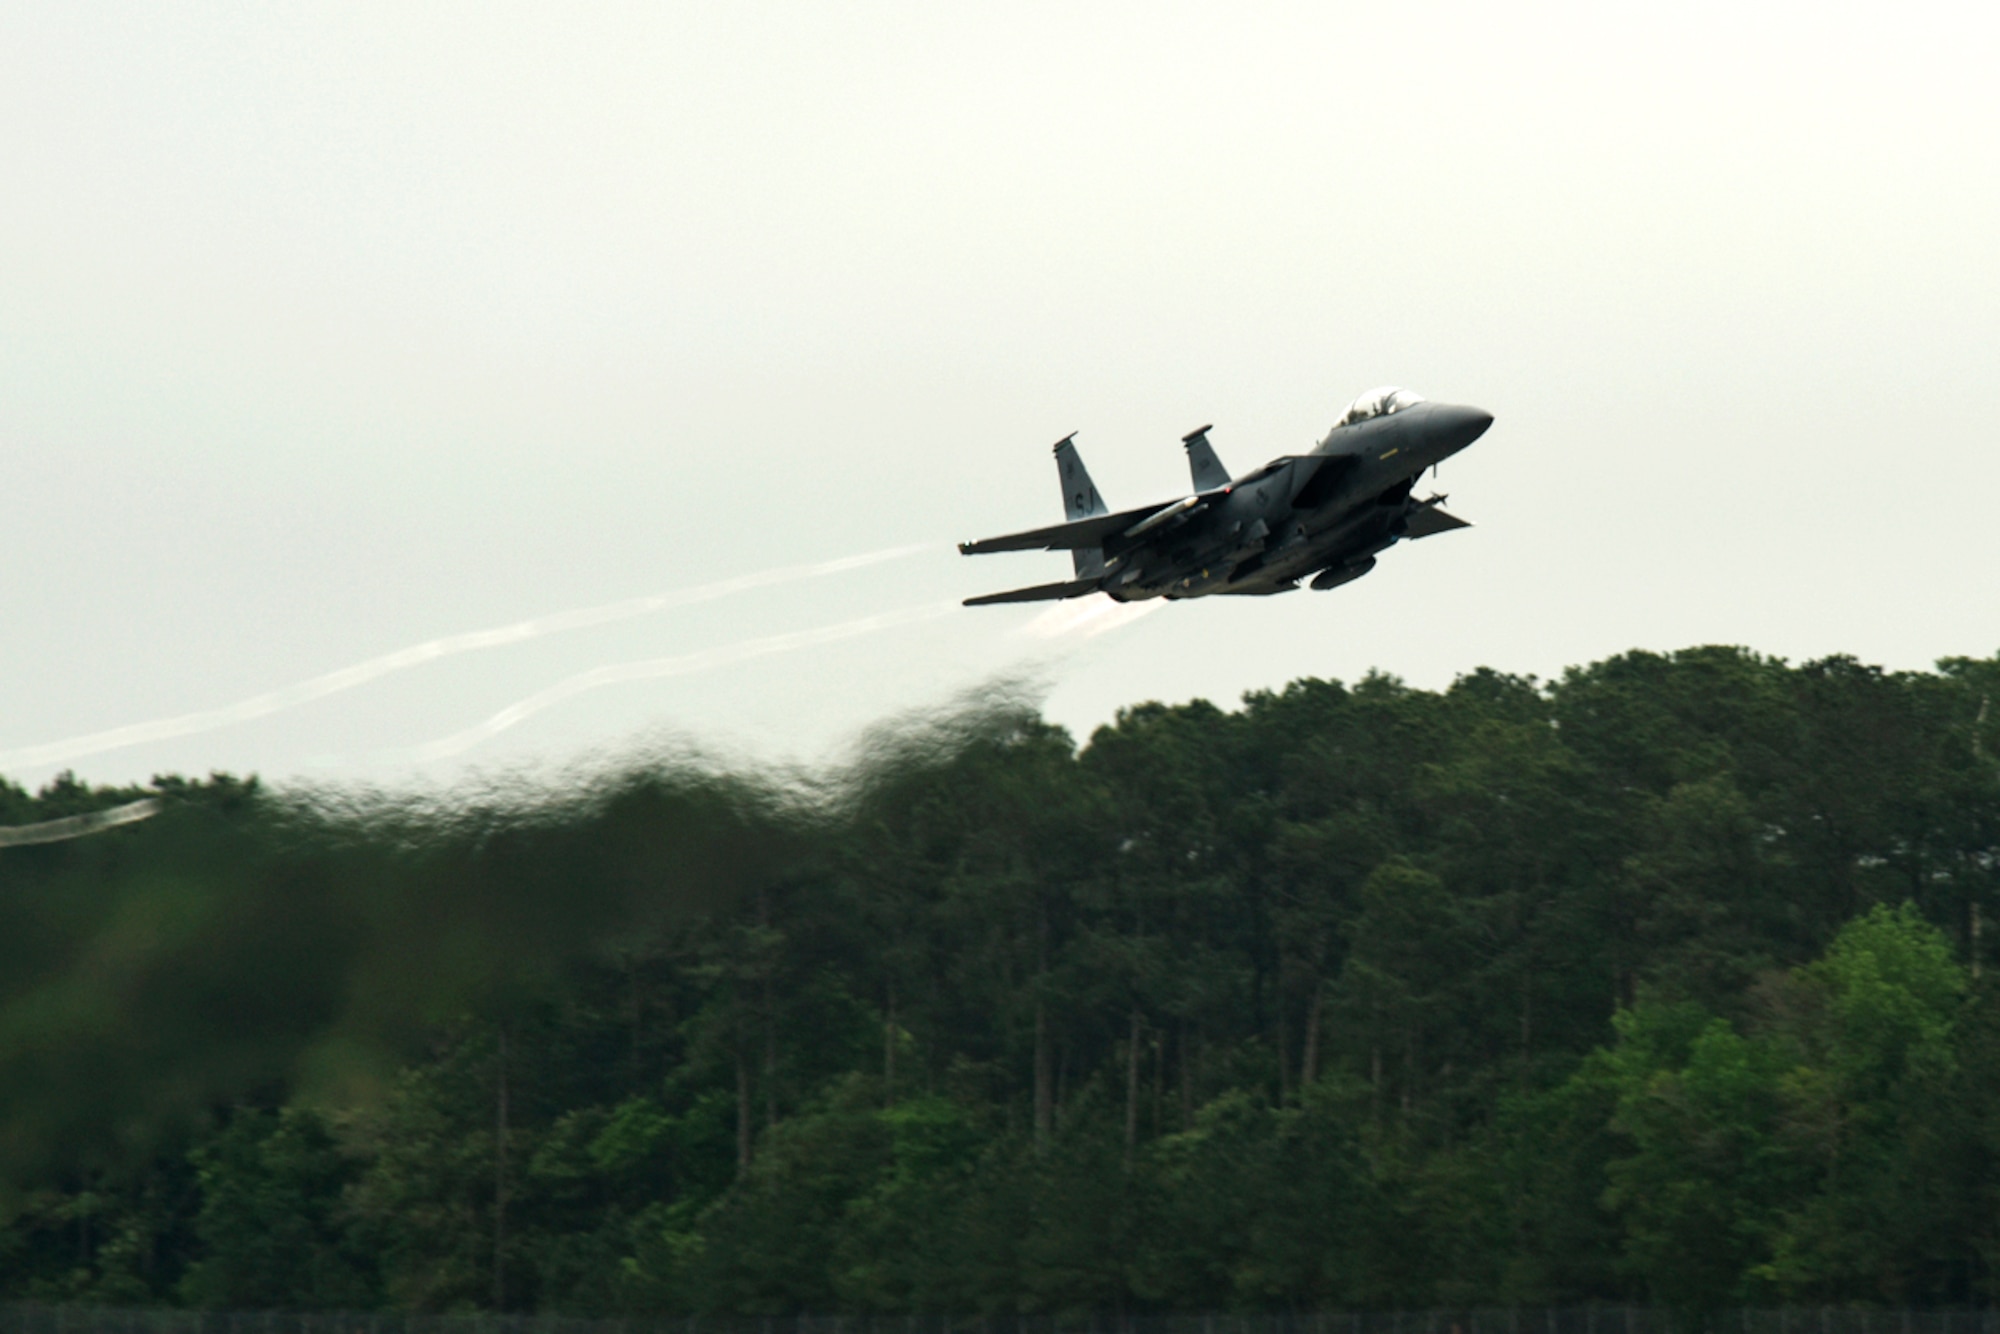 An F-15E Strike Eagle takes off in route to Hill Air Force Base, Utah, for exercise Combat Hammer, April 29, 2016, at Seymour Johnson Air Force Base, North Carolina. Approximately 14 F-15Es from the 336th Fighter Squadron left for the two-week exercise for combat training and weapons testing. (U.S. Air Force photo by Airman Shawna L. Keyes/Released)